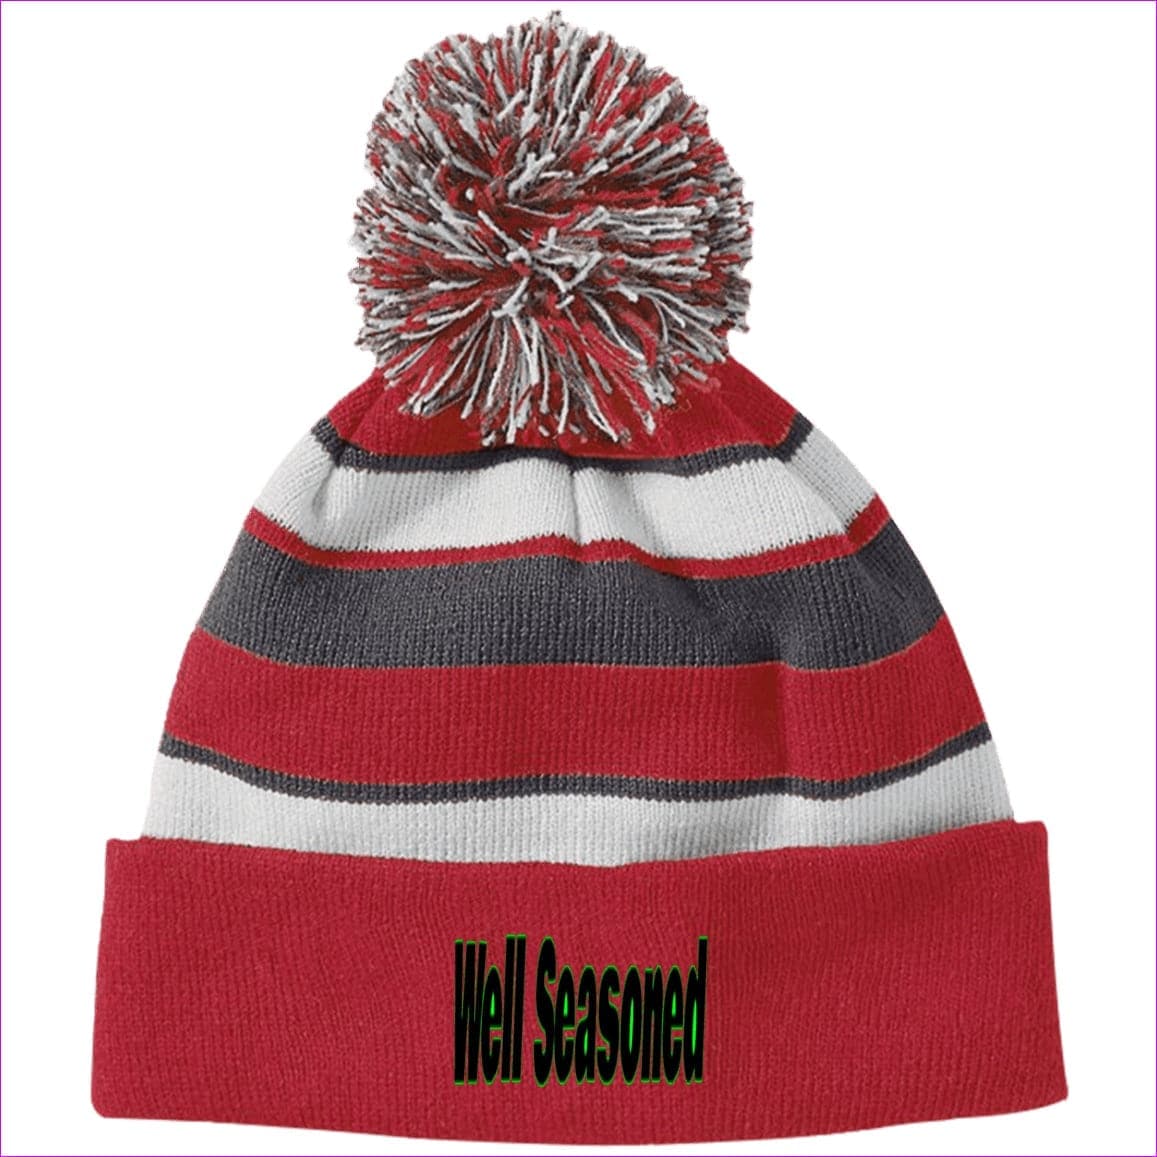 Scarlet/White One Size Well Seasoned Embroidered Holloway Striped Beanie with Pom - Hats at TFC&H Co.